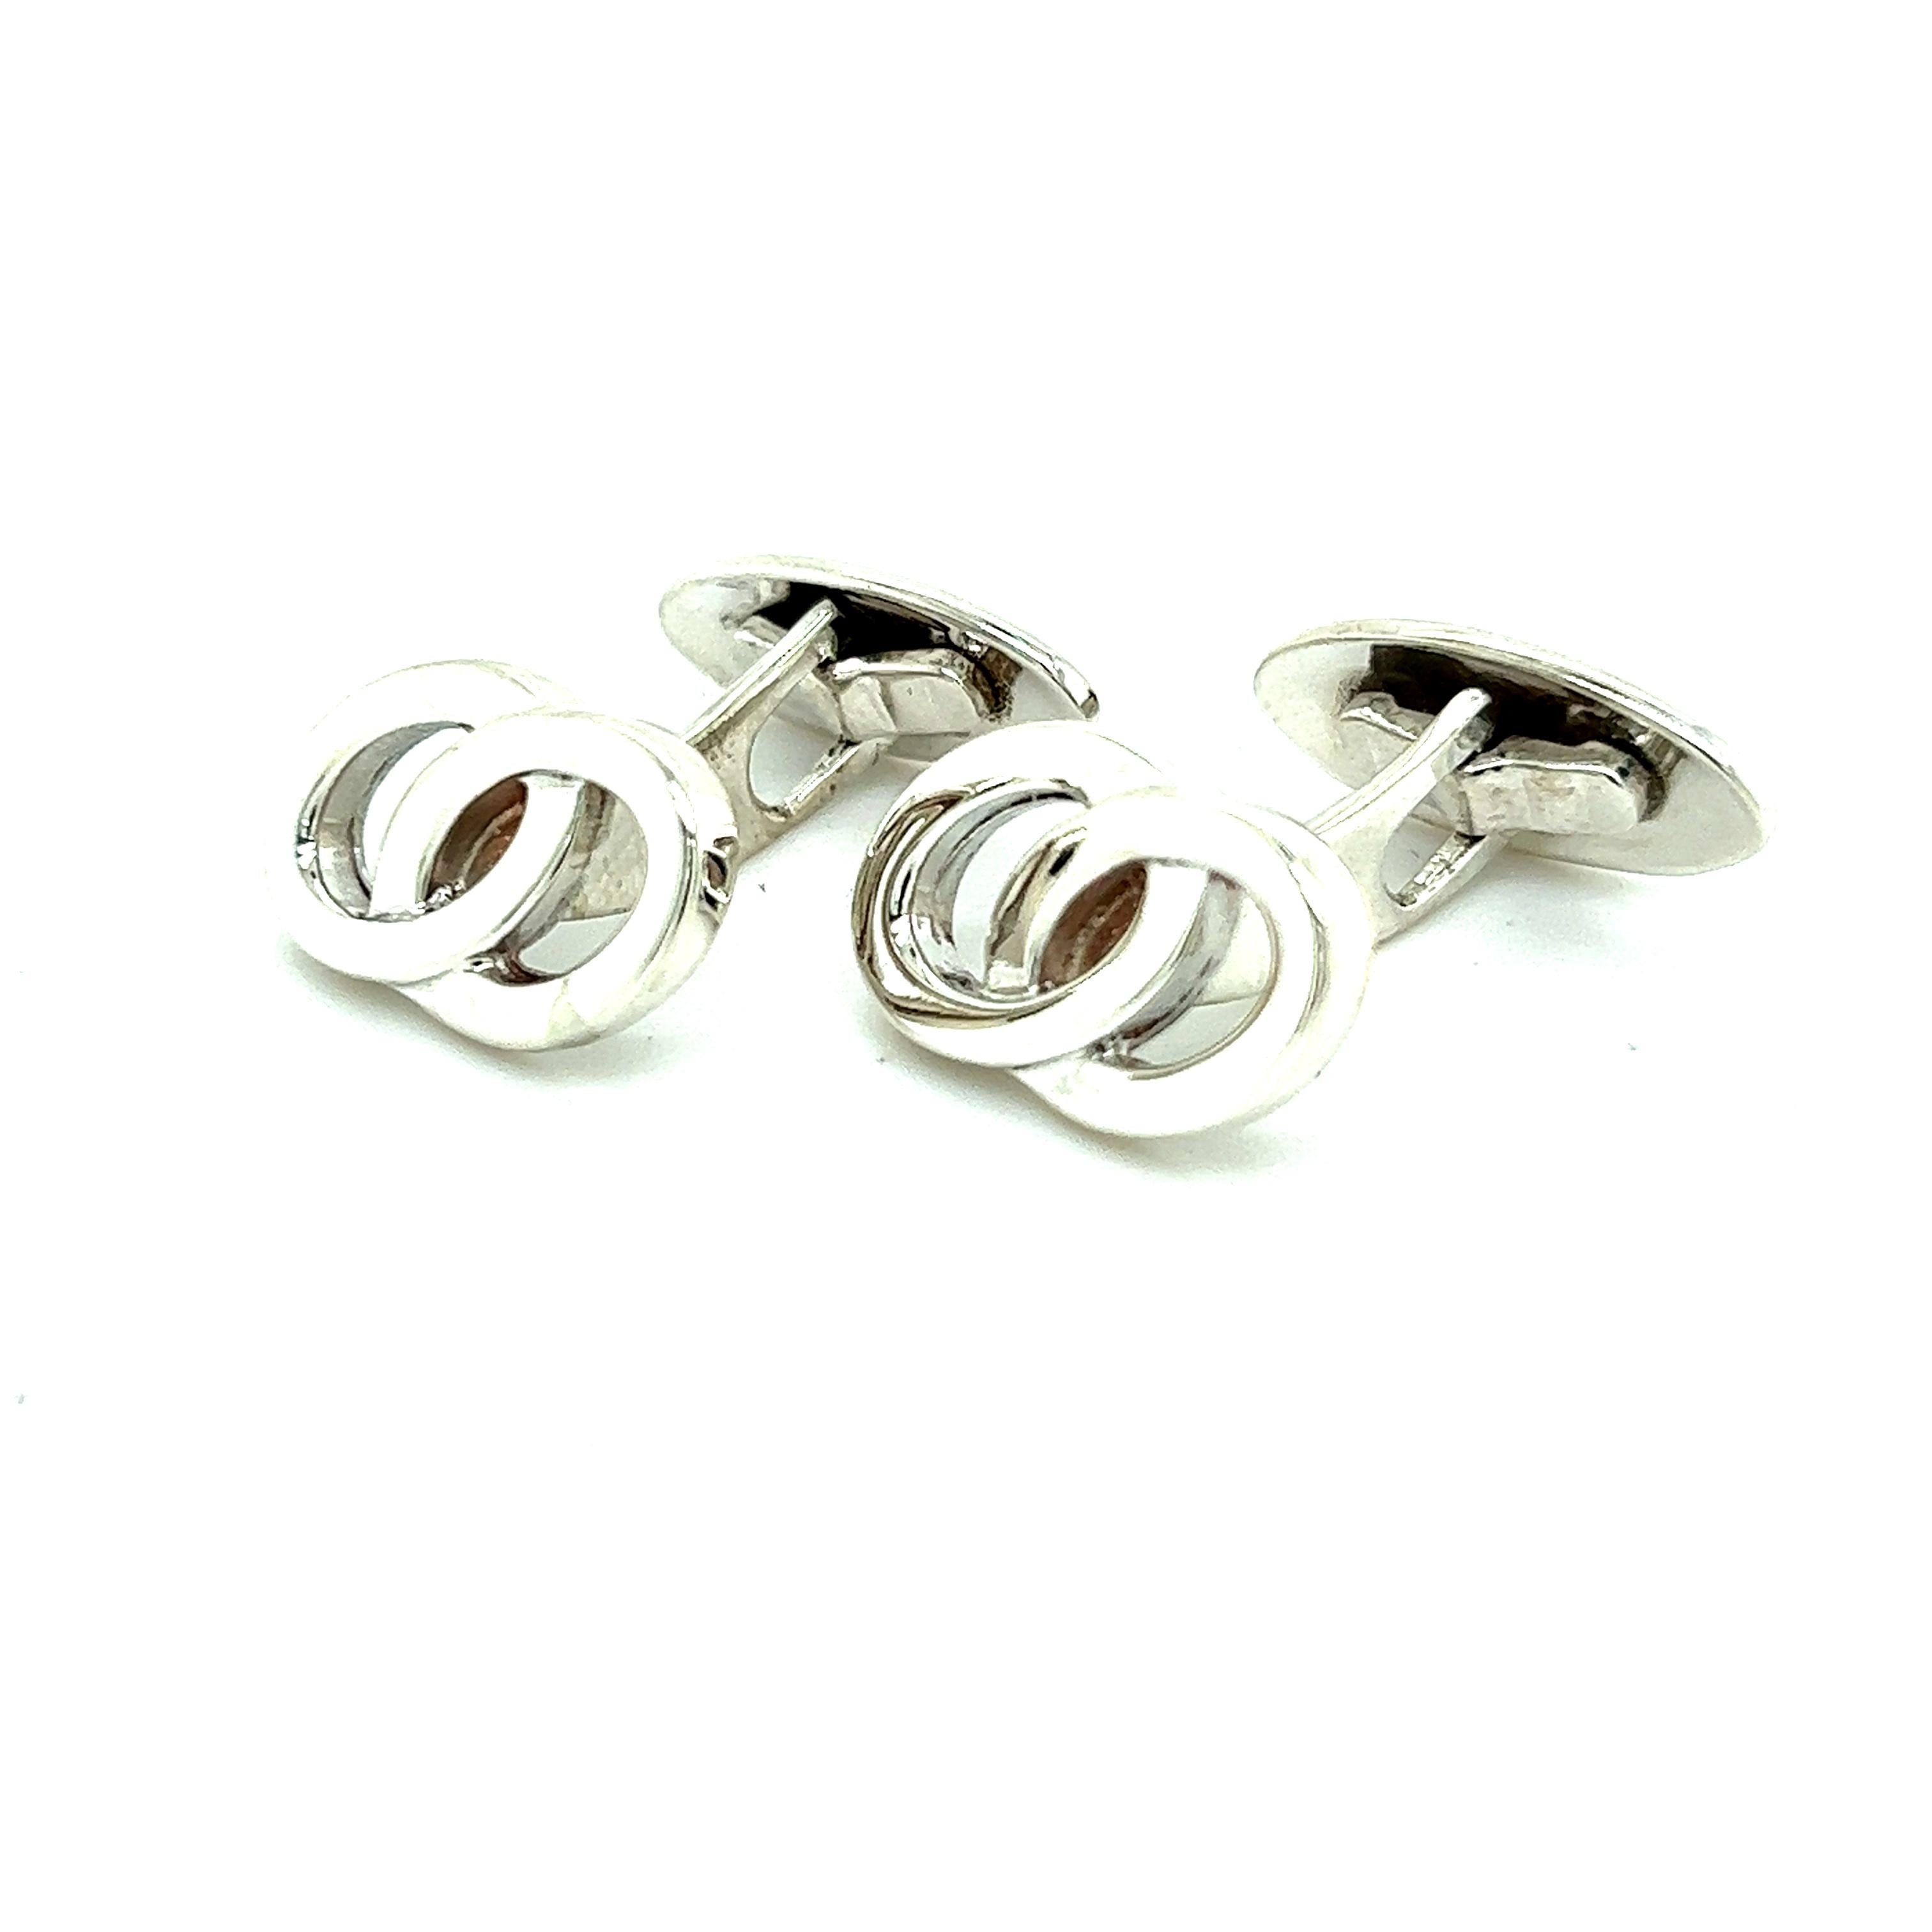 Tiffany & Co Estate Cufflinks Sterling Silver TIF335

TRUSTED SELLER SINCE 2002

PLEASE SEE OUR HUNDREDS OF POSITIVE FEEDBACKS FROM OUR CLIENTS!!

FREE SHIPPING

DETAILS
Weight: 10 Grams
Metal: Sterling Silver

These Authentic Tiffany & Co. Men's